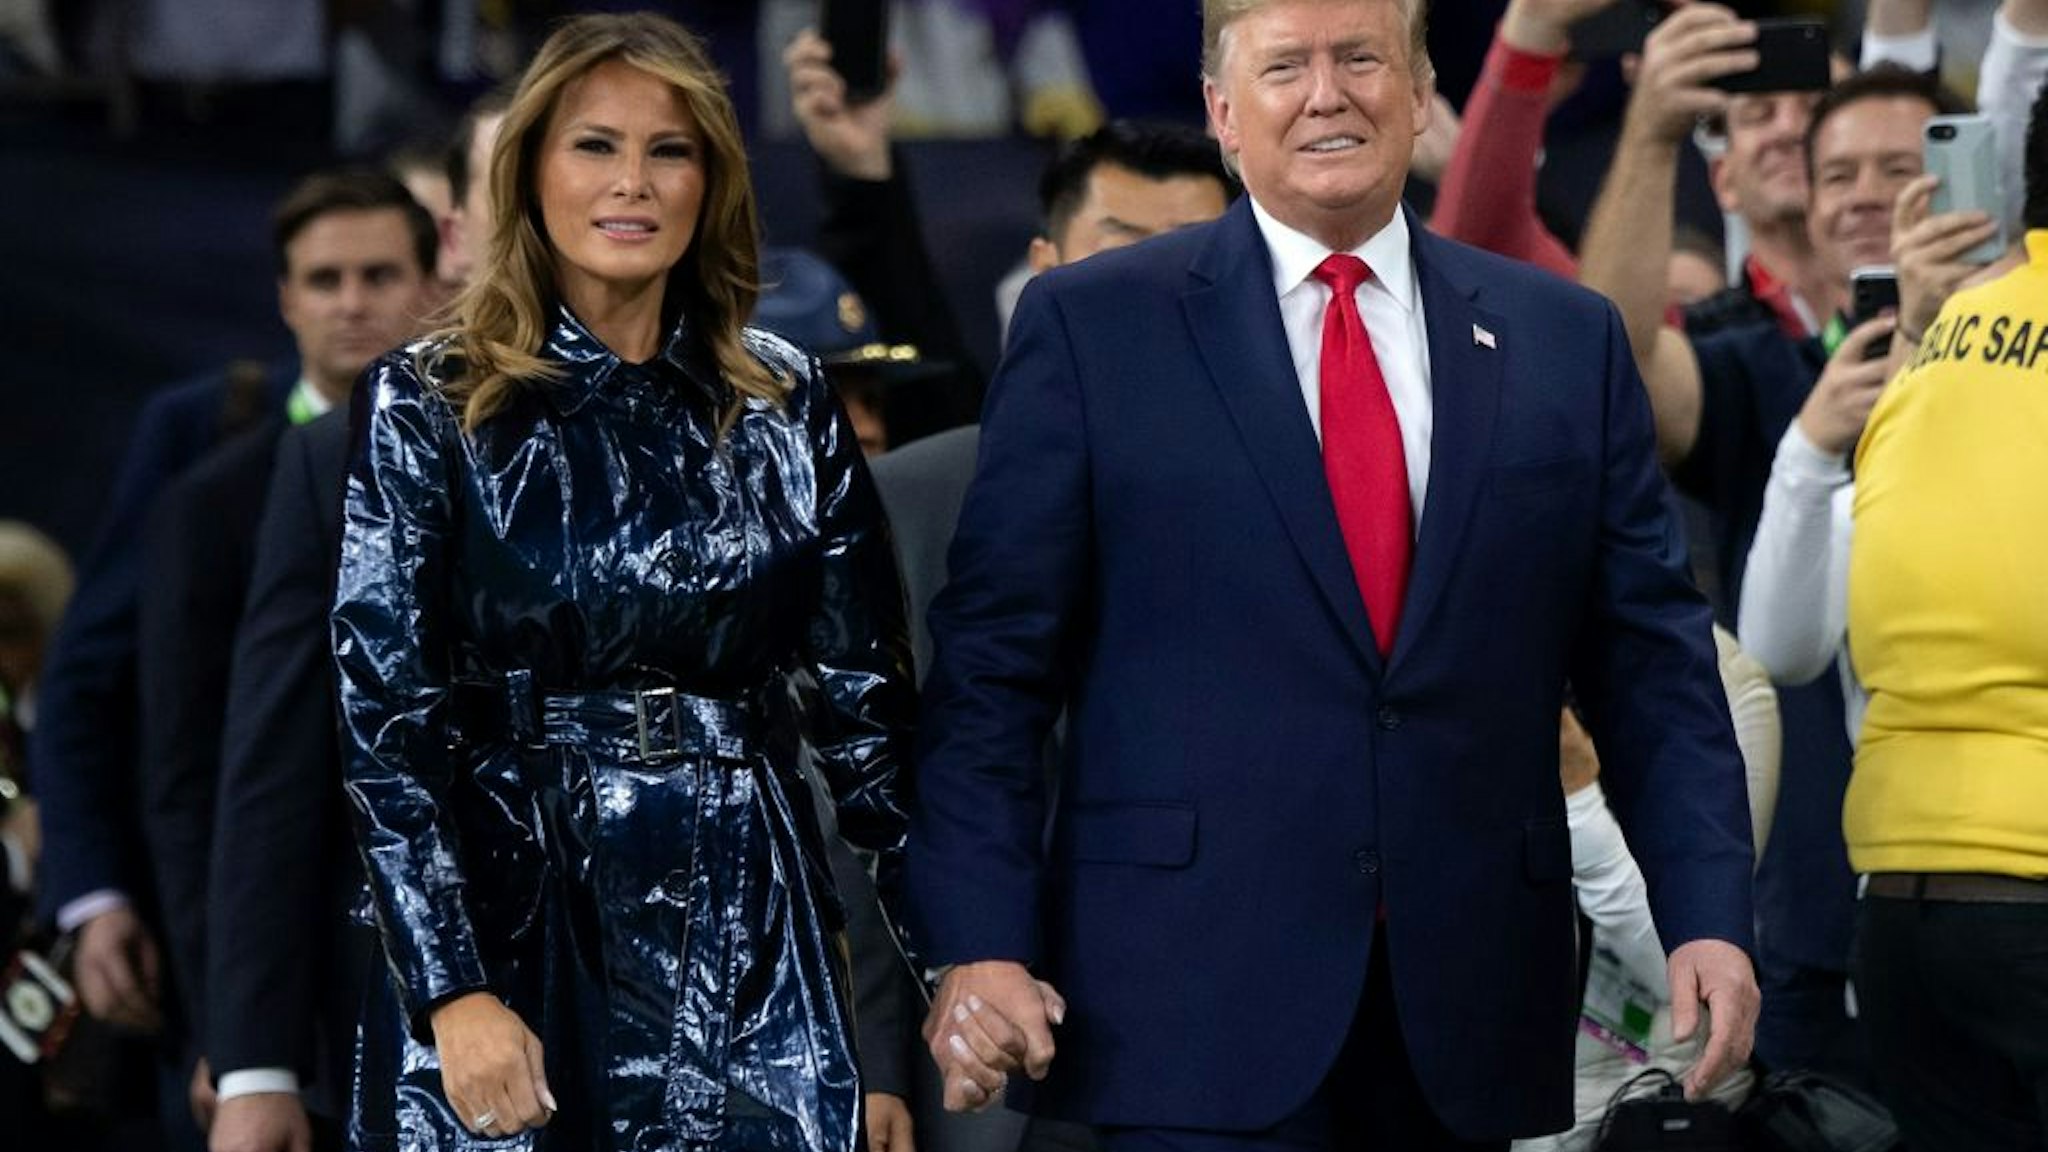 US President Donald Trump and First Lady Melania Trump attend the College Football Playoff National Championship game at the Mercedes-Benz Superdome in New Orleans, Louisiana, January 13, 2020.